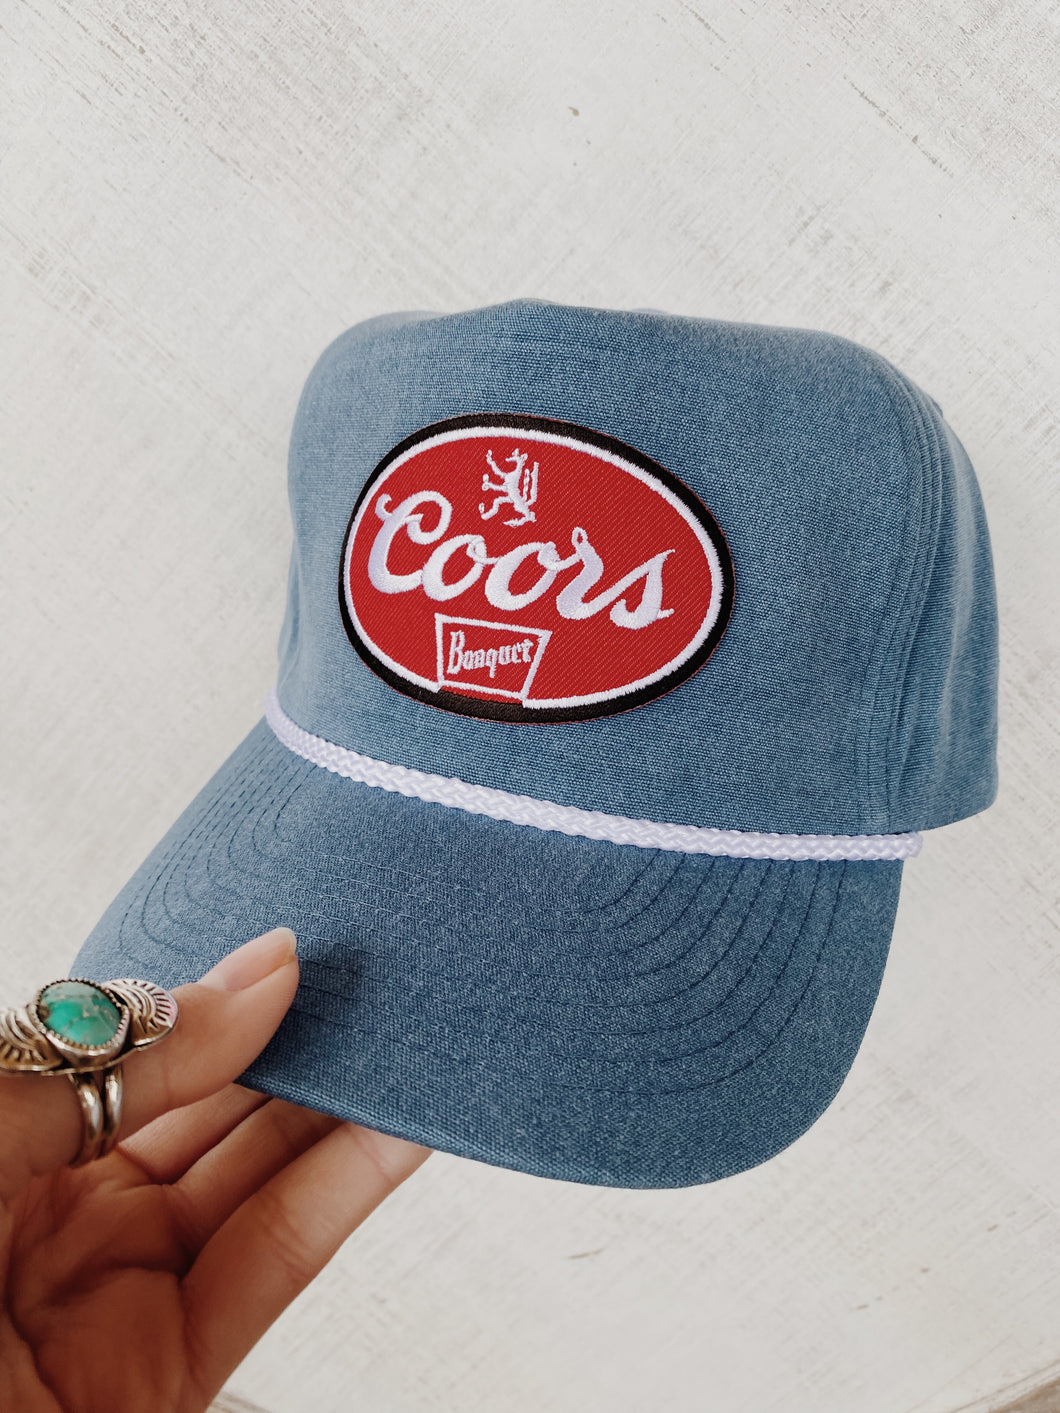 Vintage Style Coors Hat